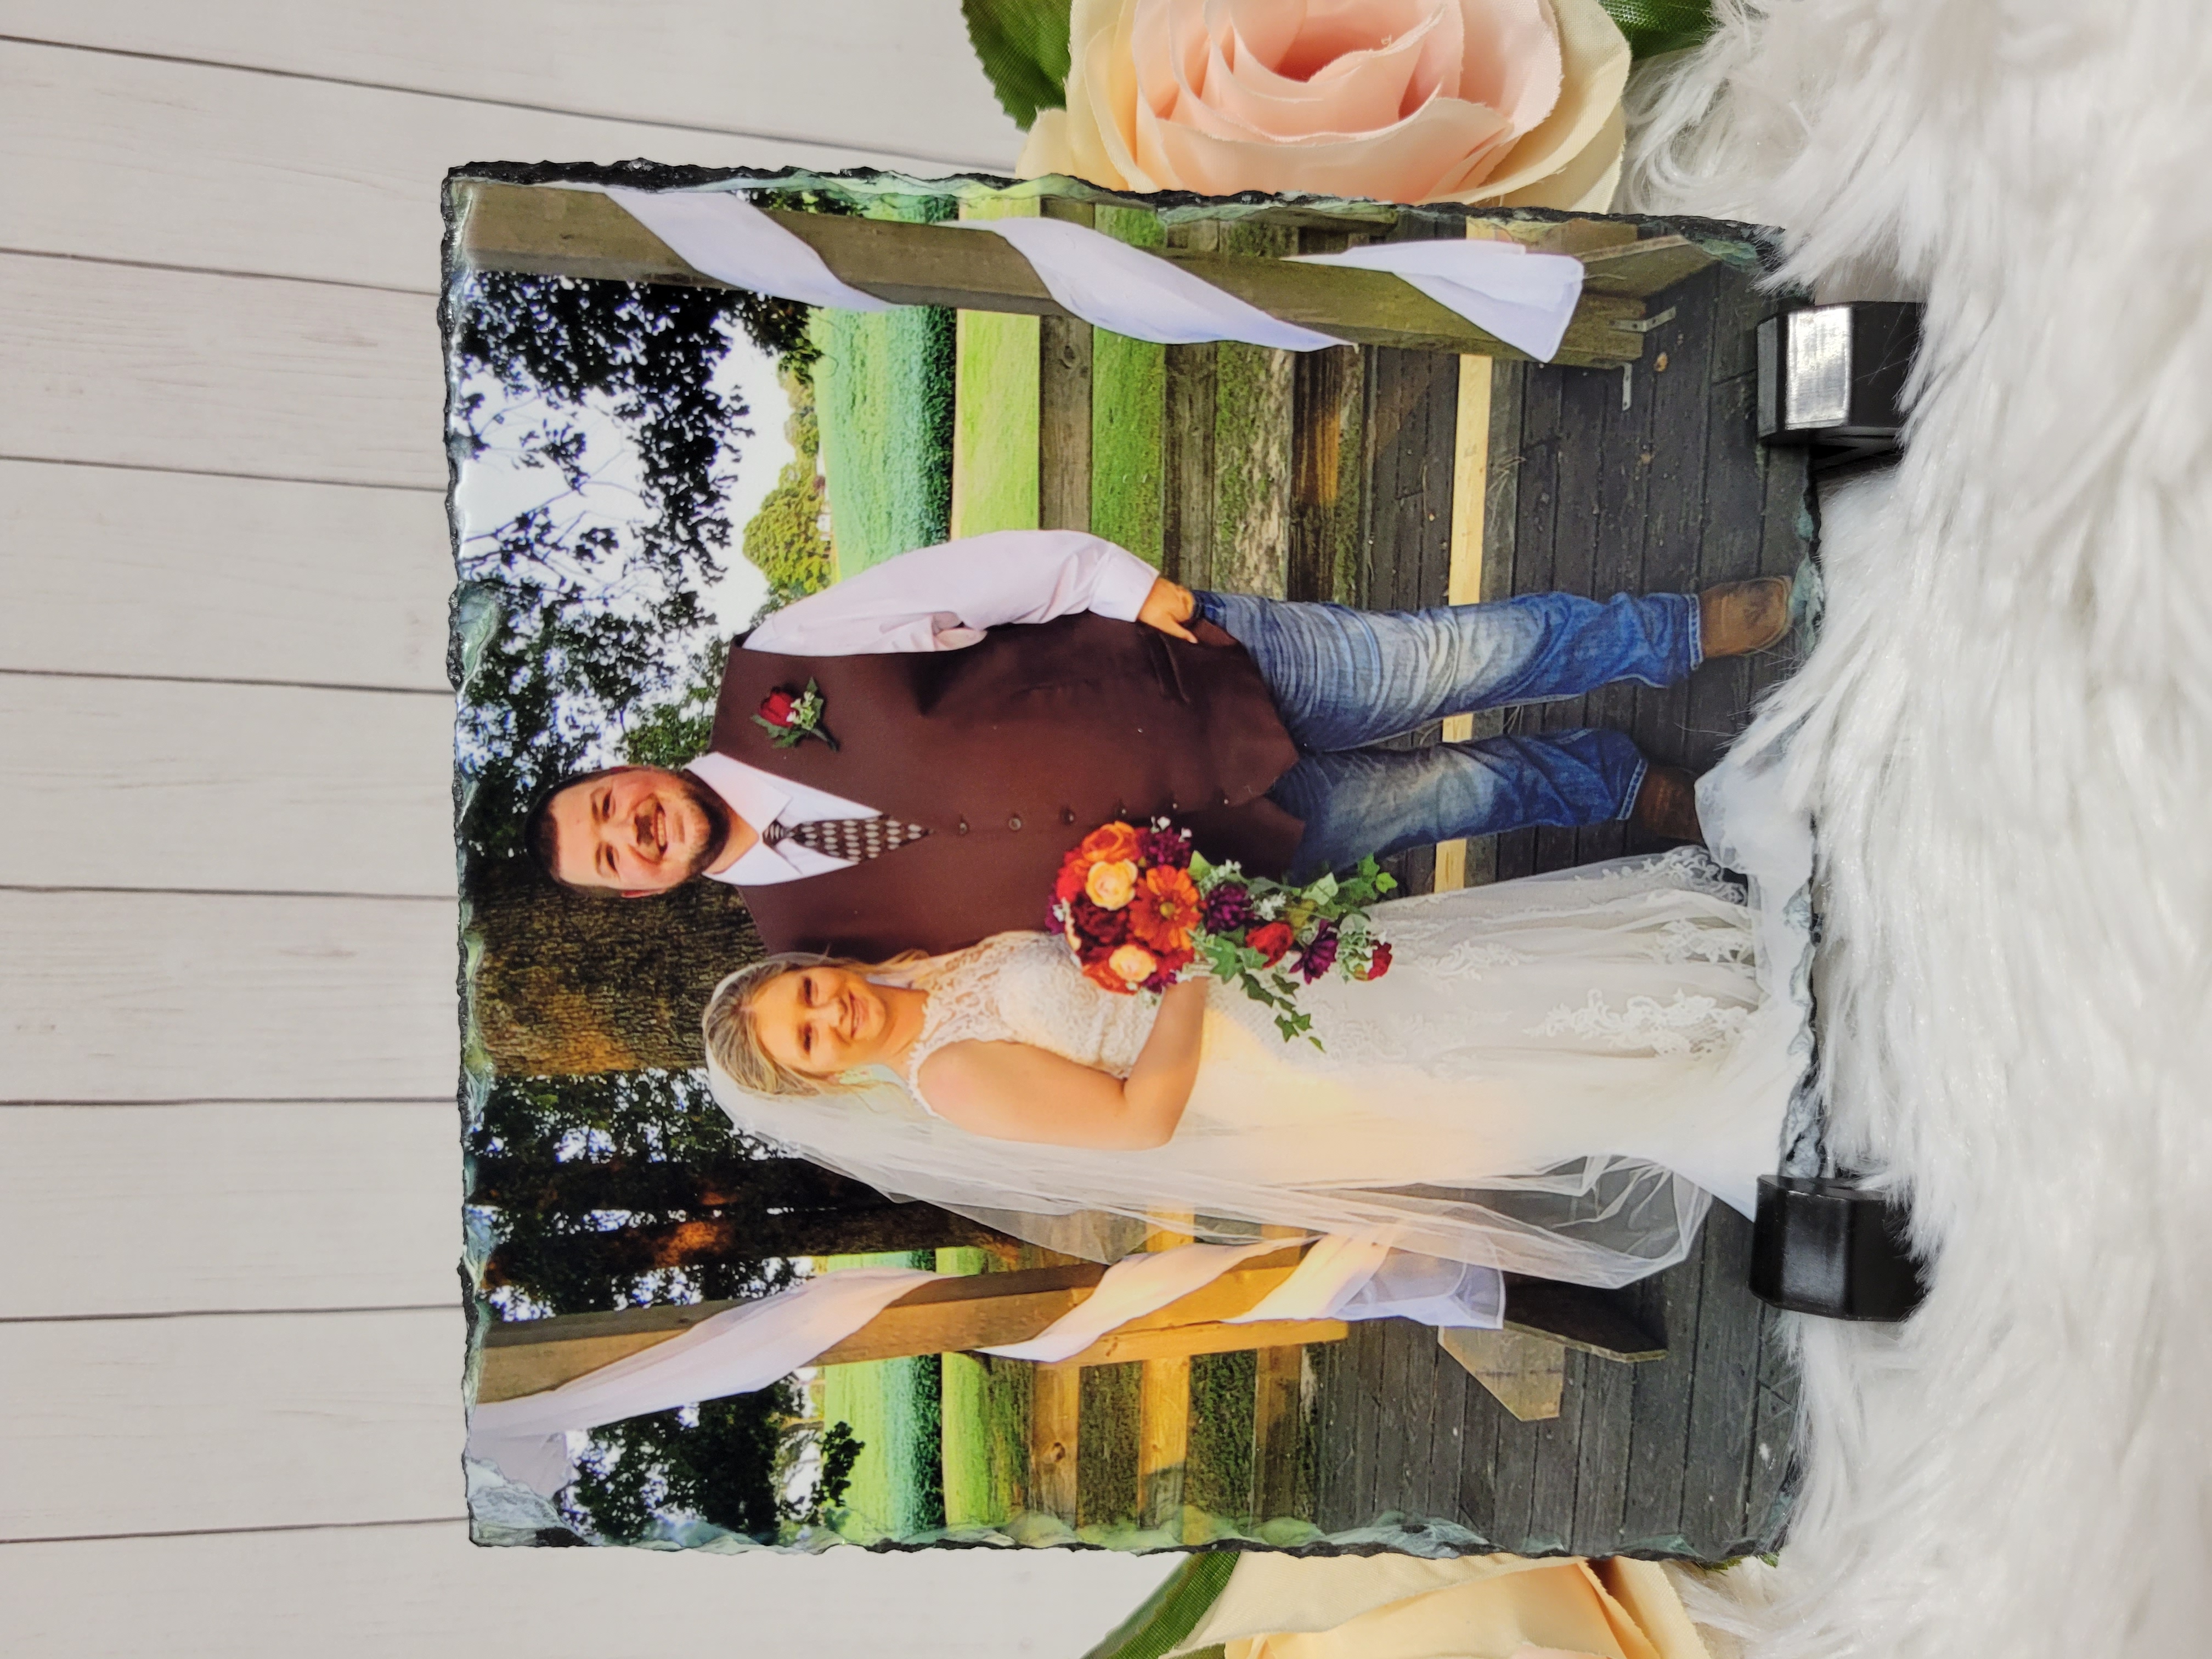 My son and his bride subbed on the 5.85 x 5.85 Sublislate plaque. The colors are so vibrant!